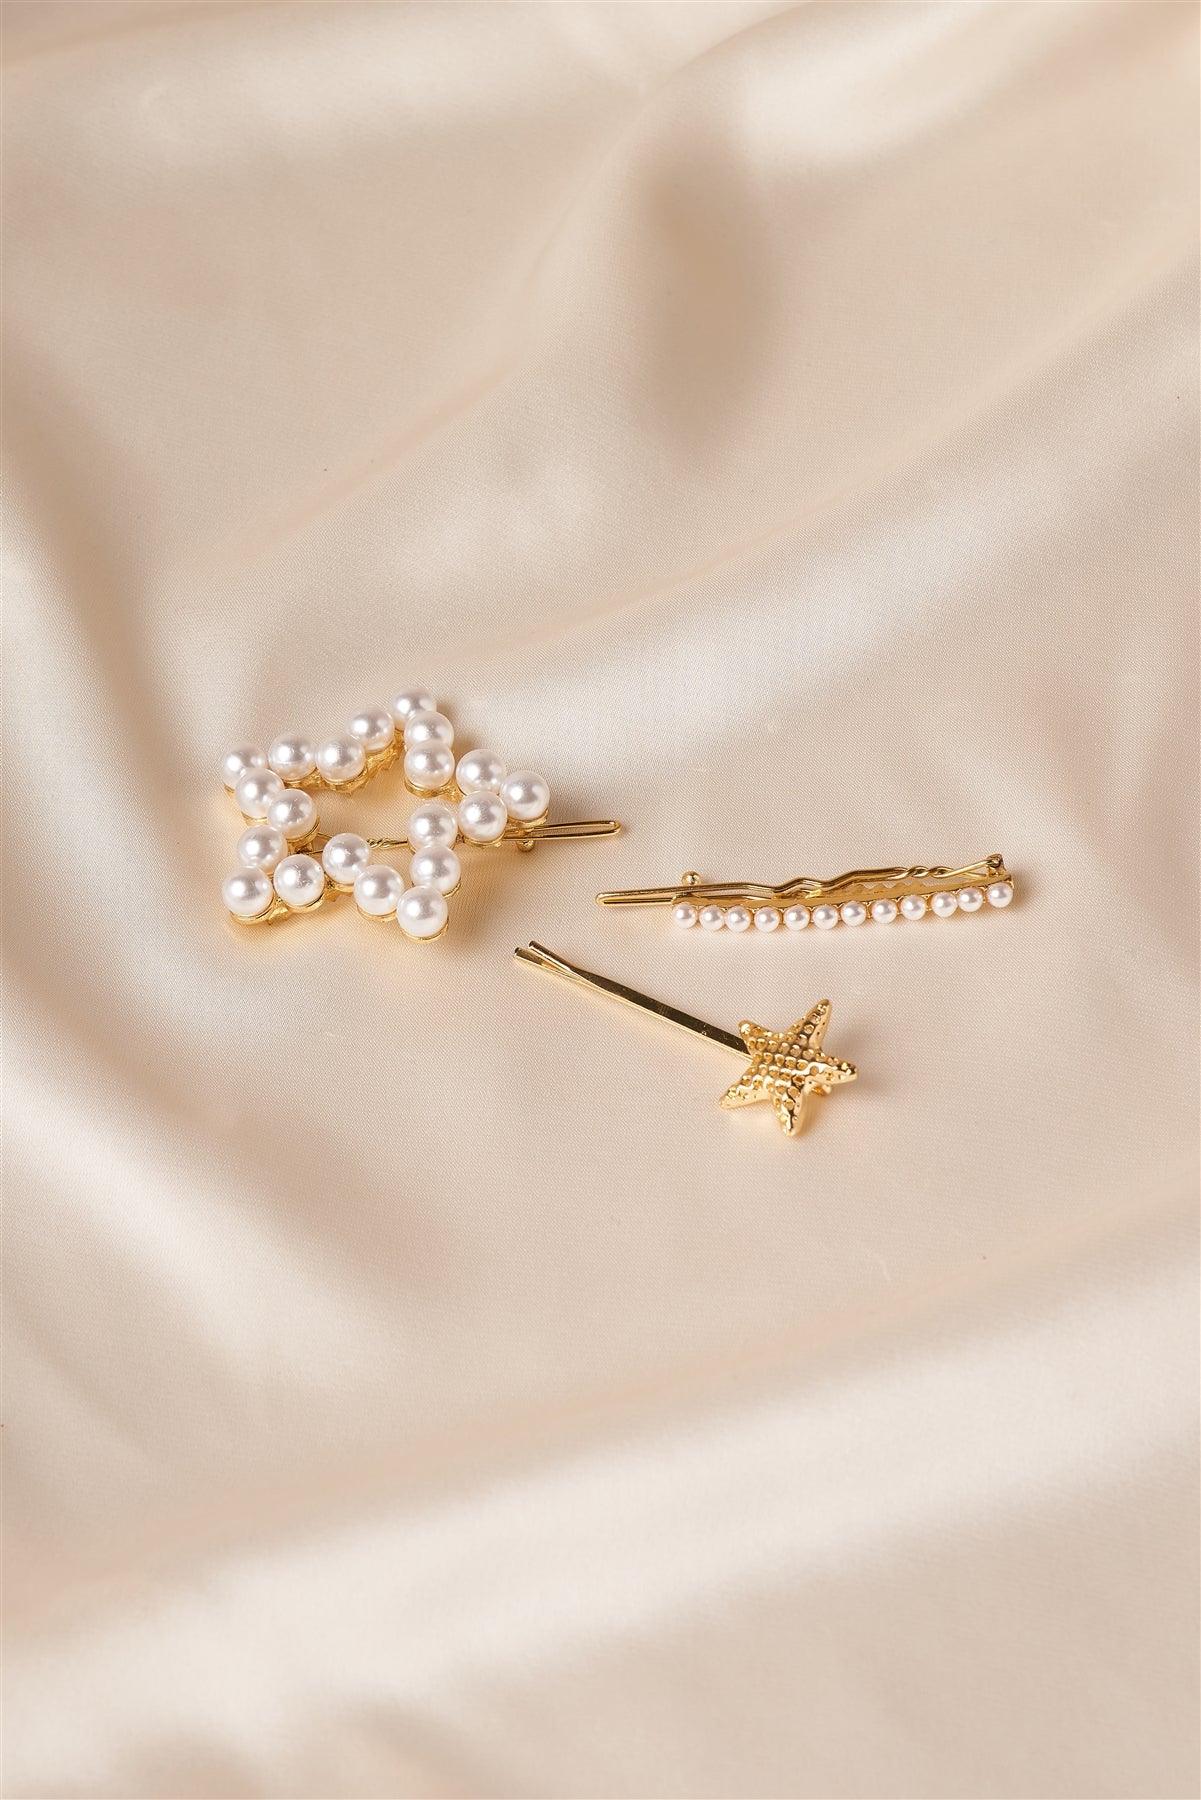 Gold Pearled Star Bobby Pins /12 Pack